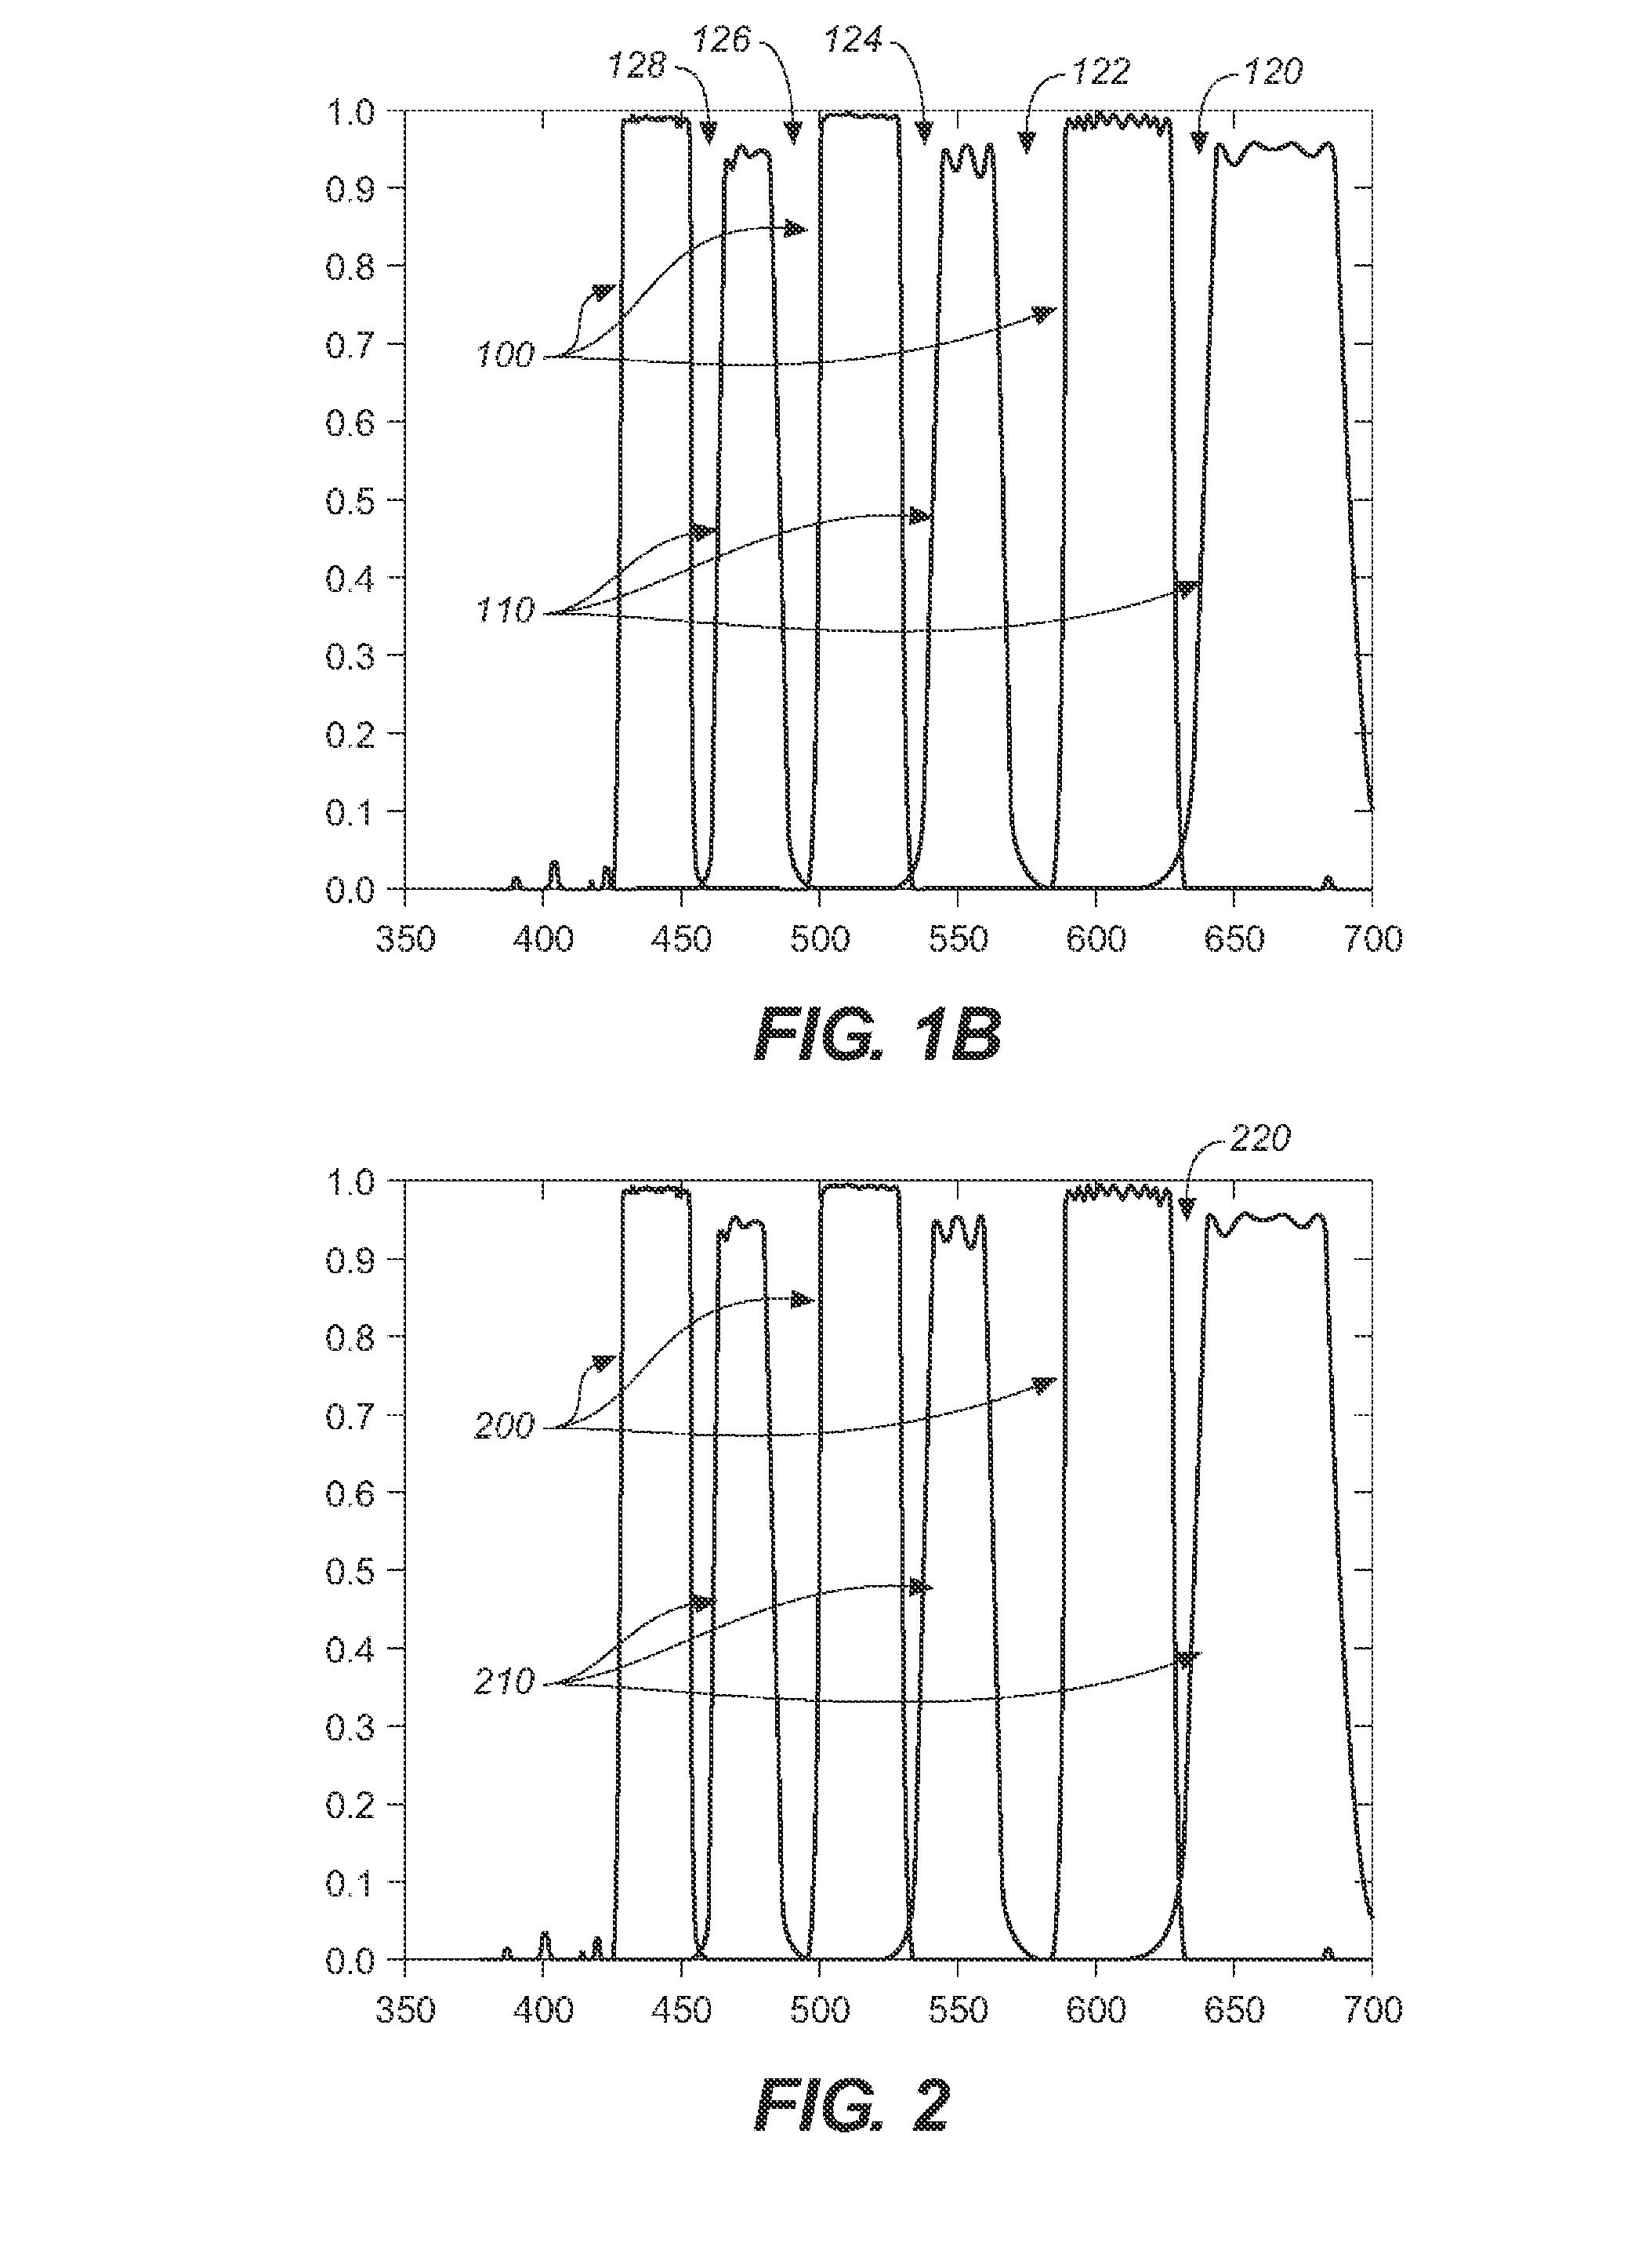 Method and system for shaped glasses and viewing 3D images